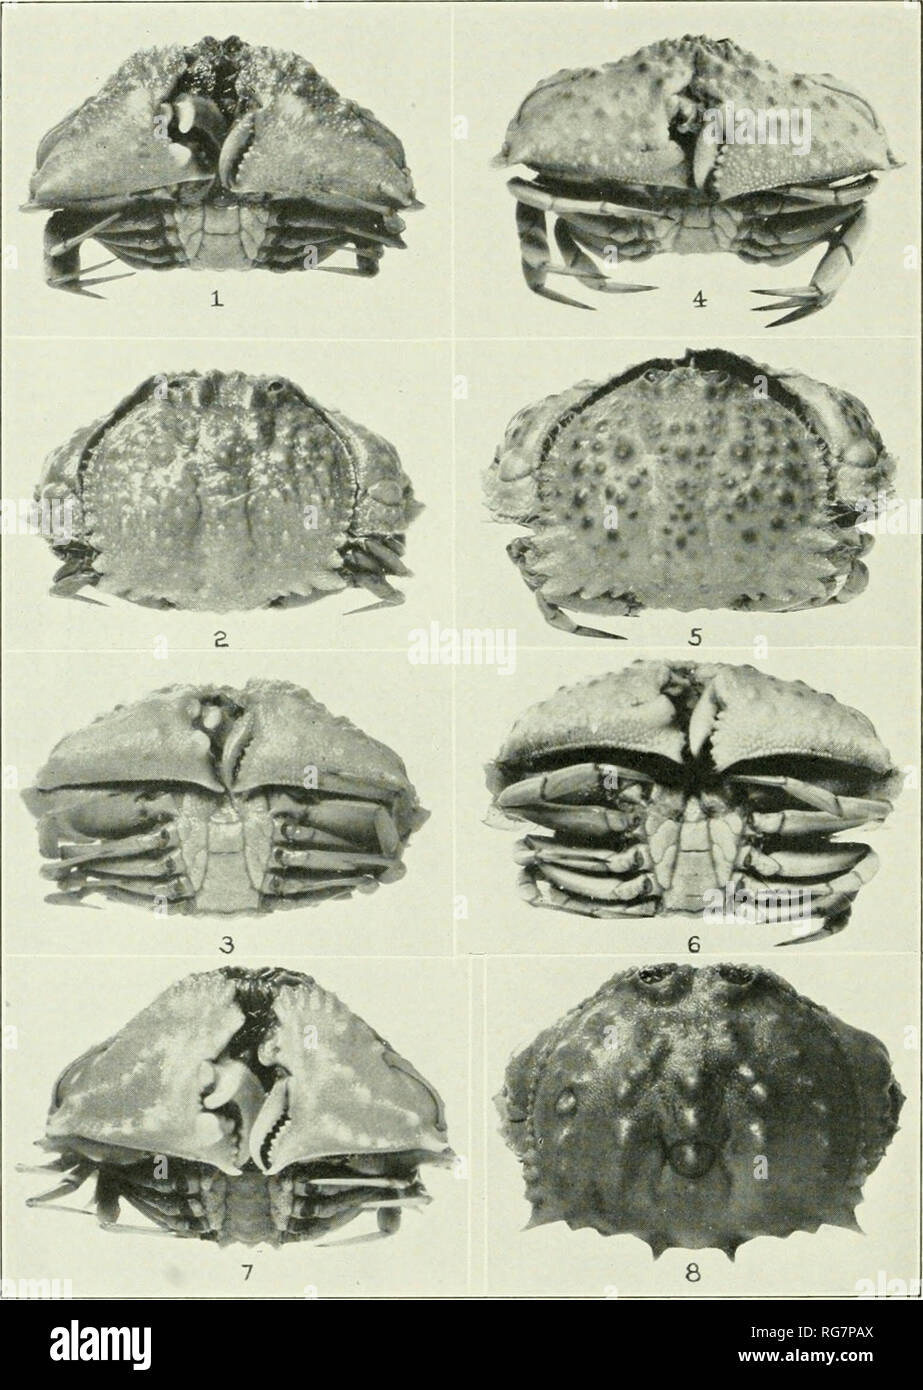 . Bulletin - United States National Museum. Science. U. S. NATIONAL MUSEUM BULLETIN 166 PLATE 64. Species of Calappa 1, C. angnsta, ycung male (51070), X I73, vertral view for chelae; 2, same, dorsal view; 3, same ventral view for abdomen; 4, C. angusta, adult male hololype (66382), five-sixths natural size, ventral view for chelae; 5, same, dorsal view; 6, same, ventral view for abdomen; 7, C. sulcata, male (24079), X i-/i, ventral view for chelae; 8, same, dorsal view.. Please note that these images are extracted from scanned page images that may have been digitally enhanced for readability  Stock Photo